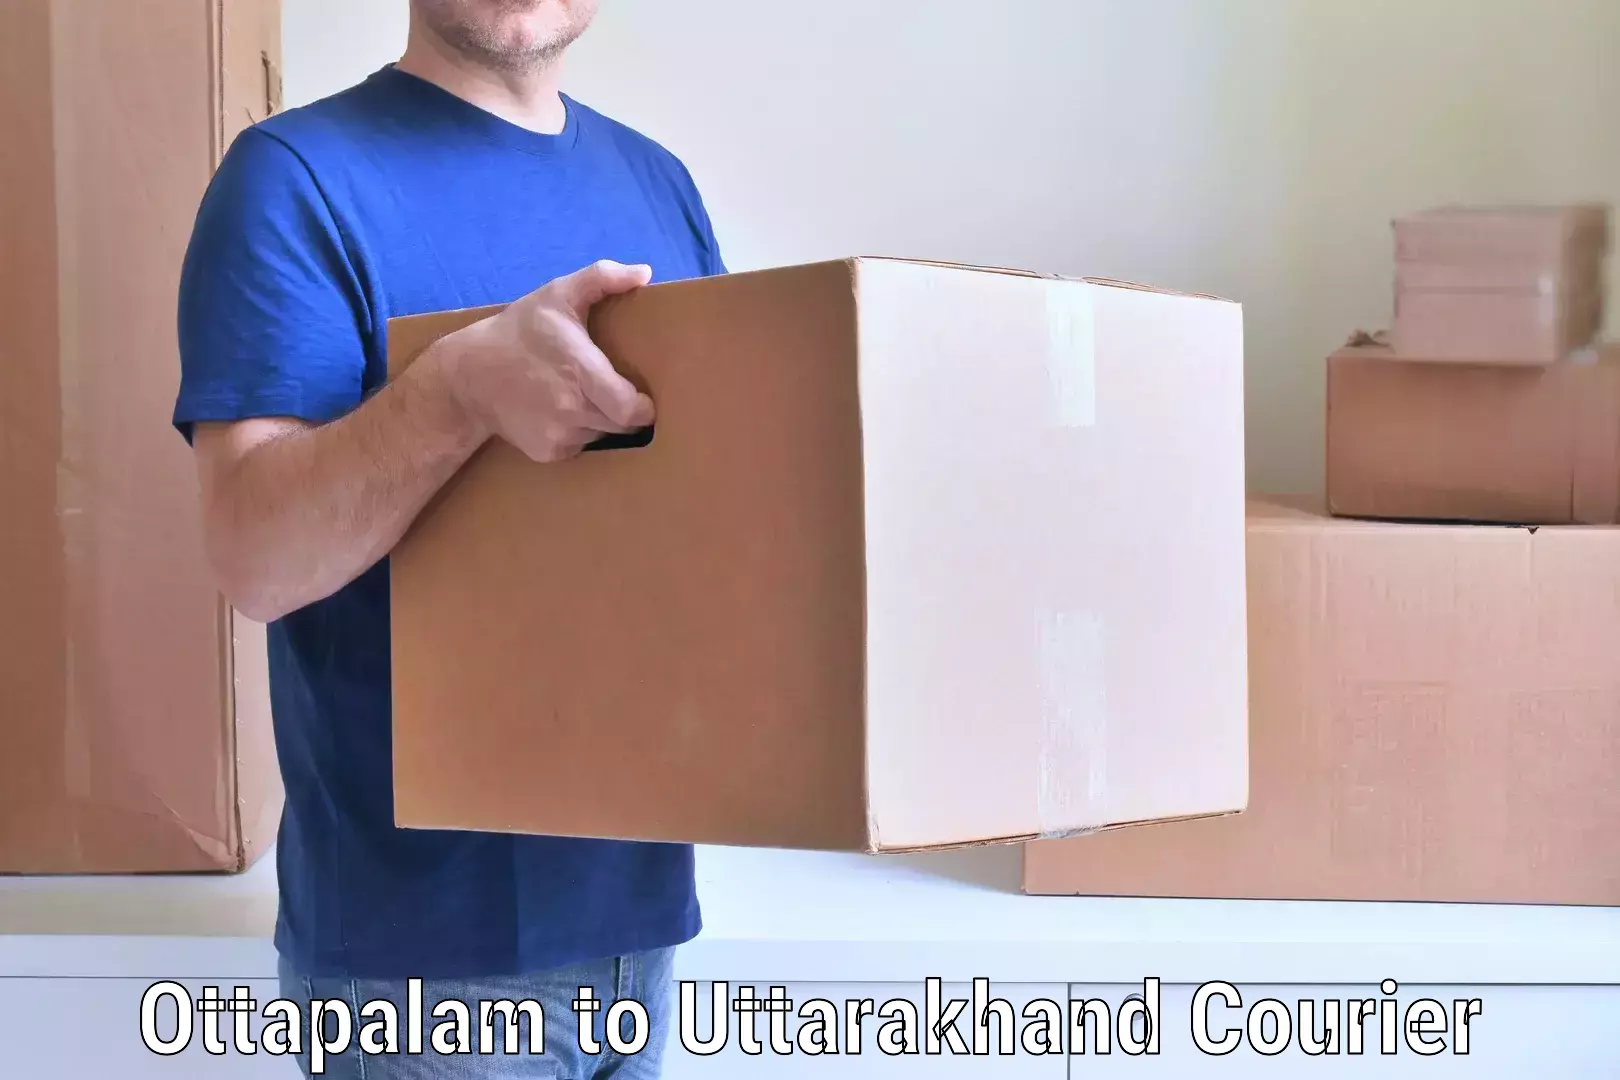 Trusted moving company in Ottapalam to Nainital